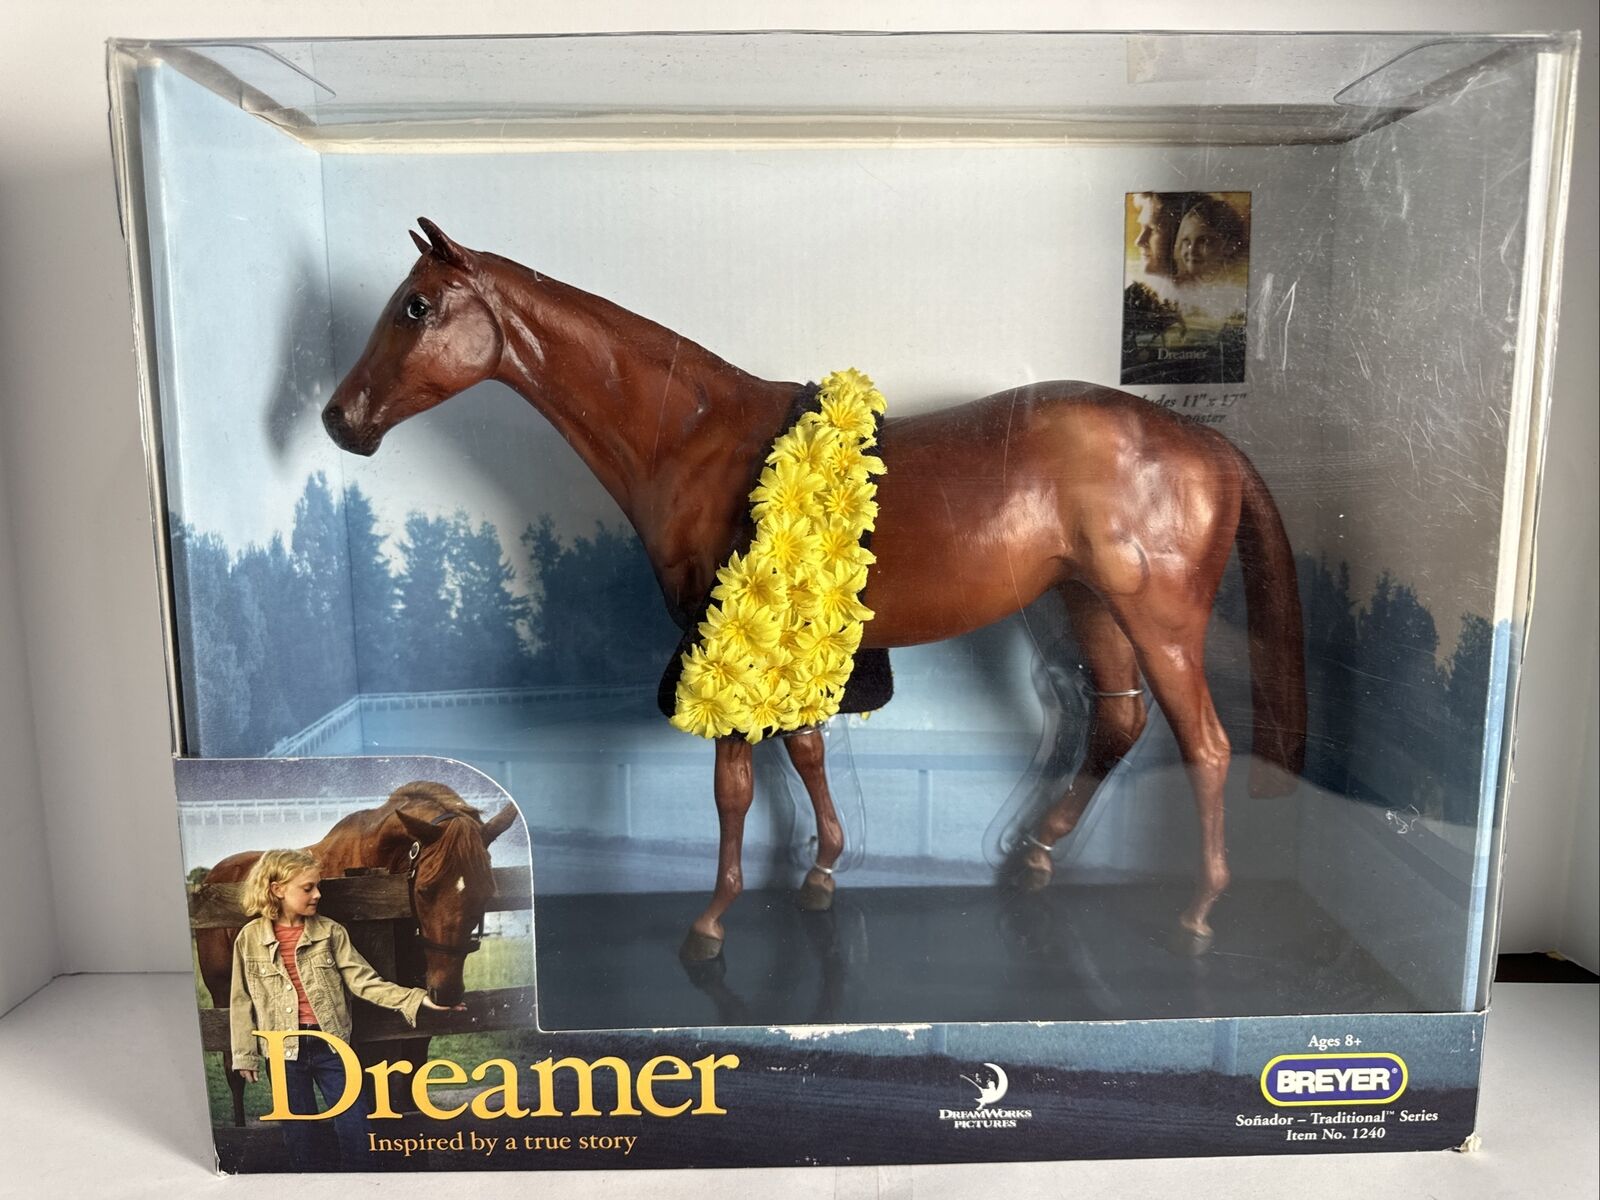 Dreamer Breyer Horse Sonador Traditional Series 1240 Year 2005 With Box & Poster